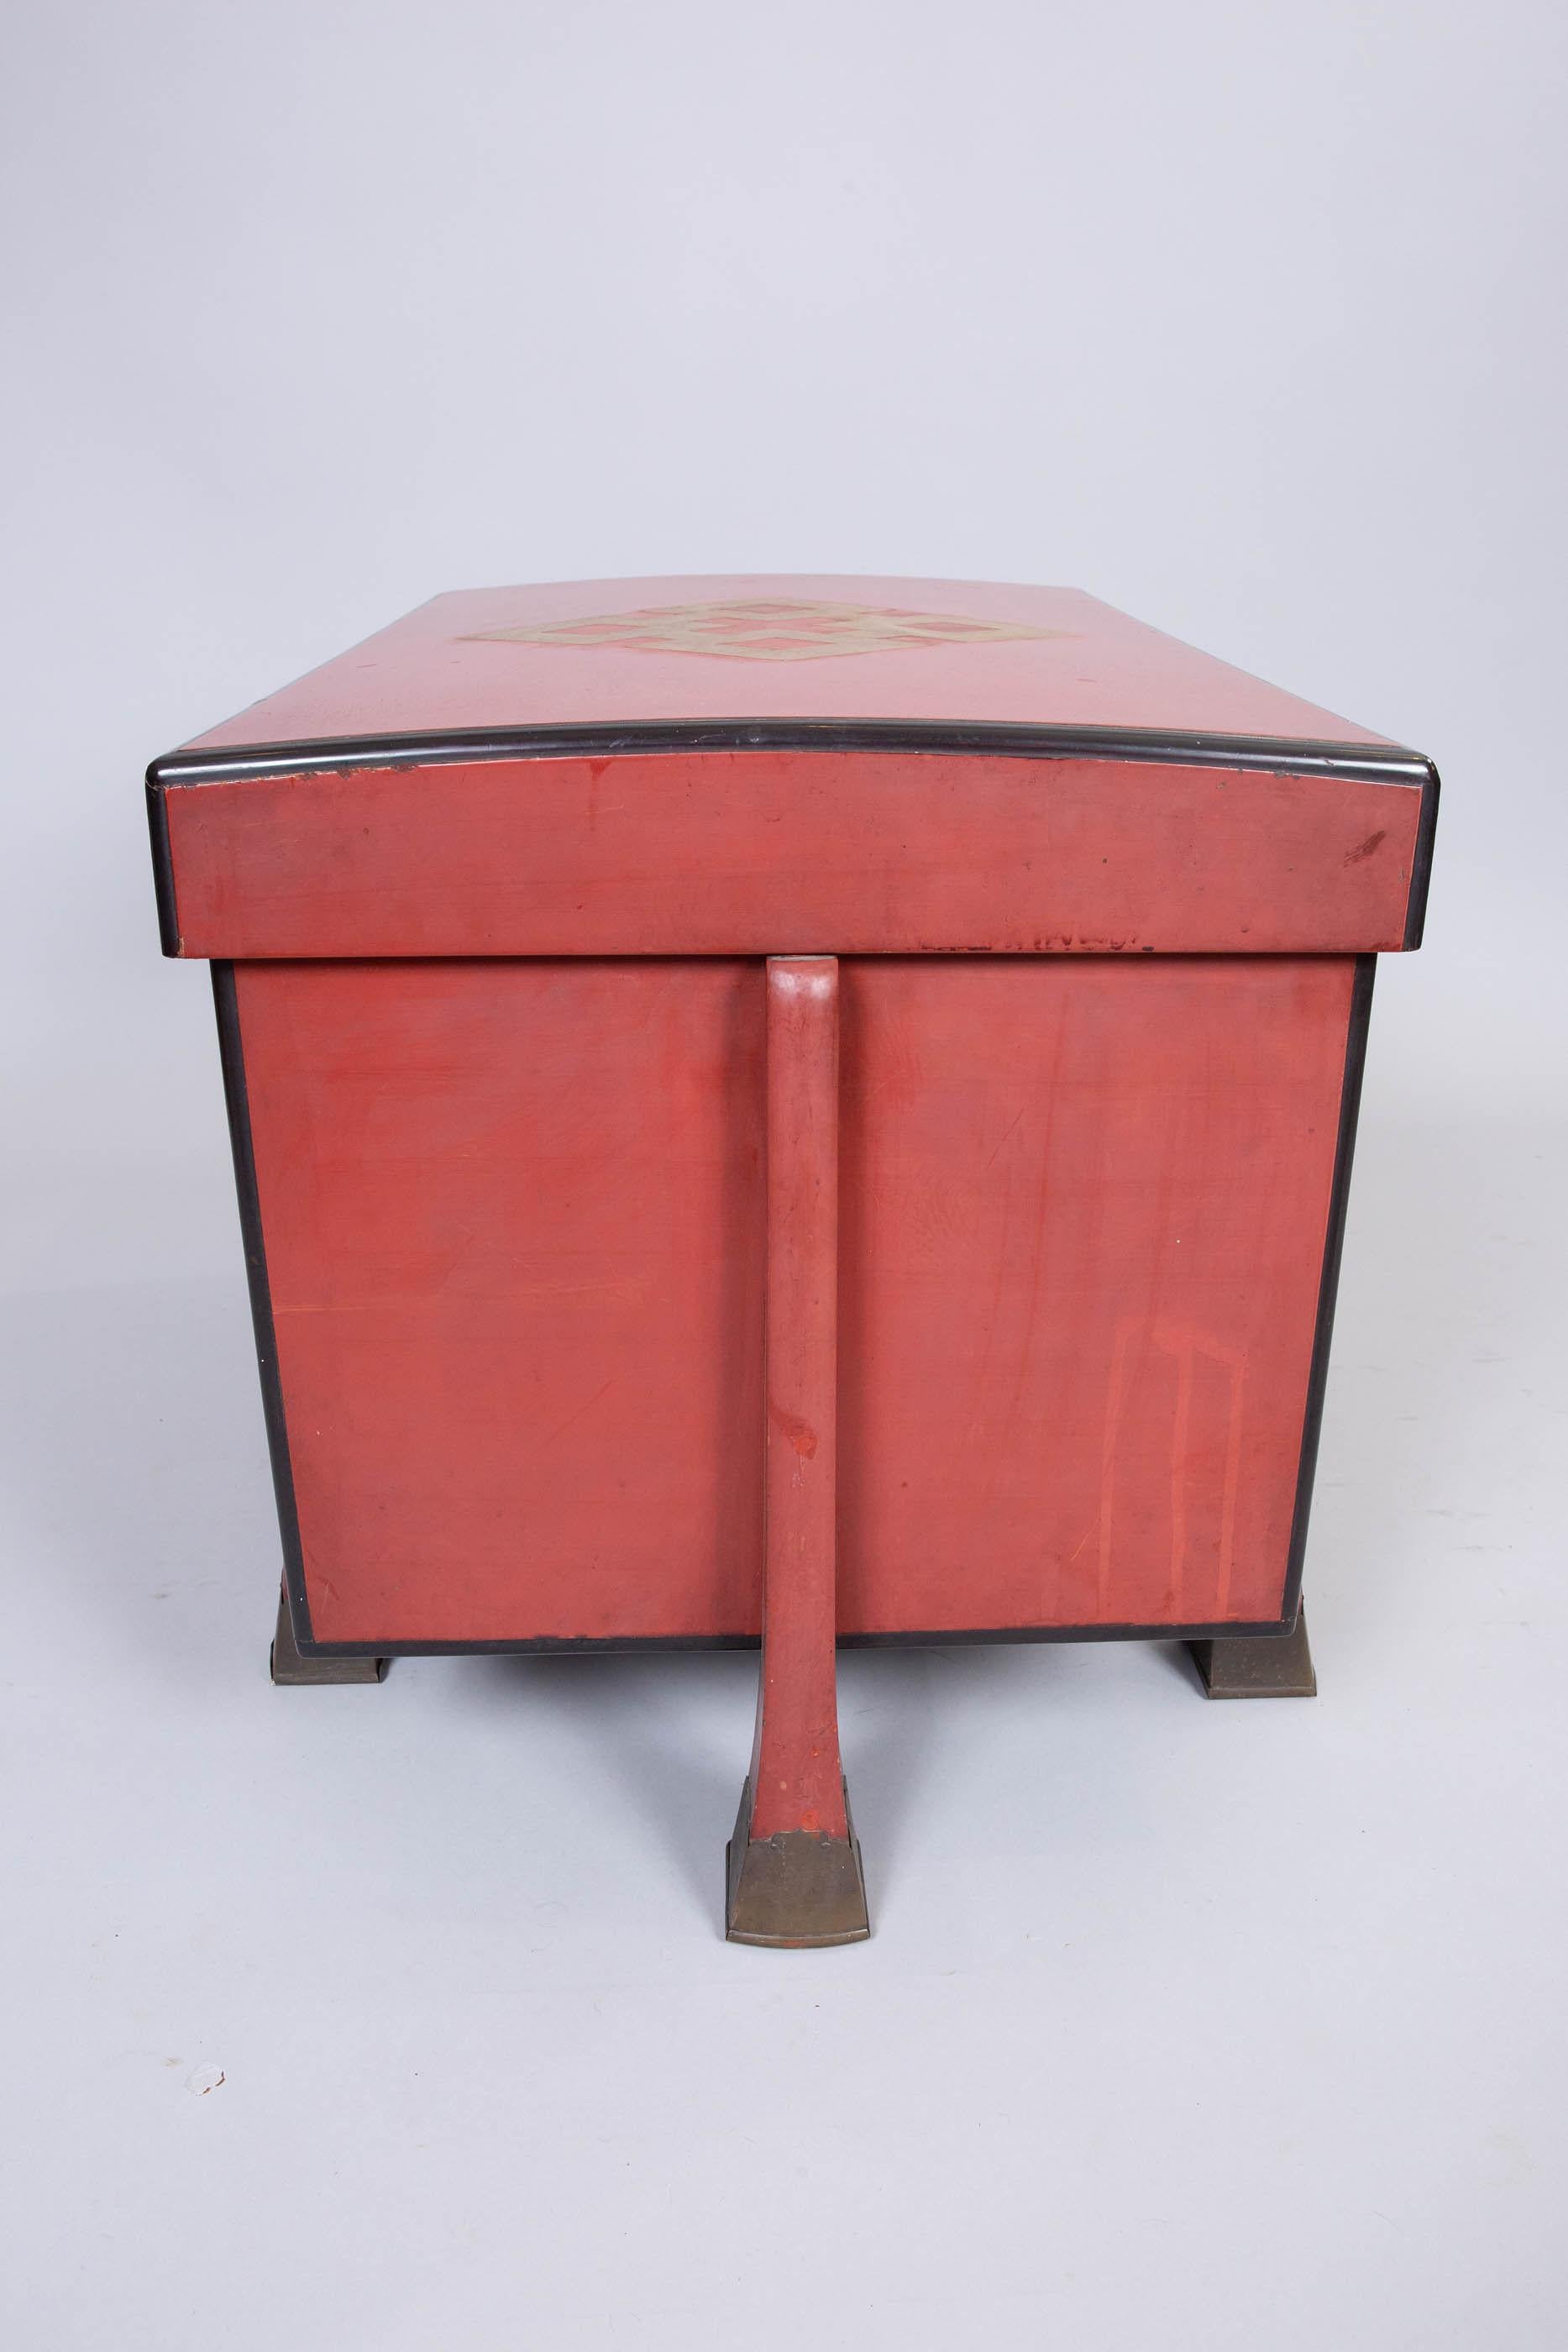 19th Century Antique Japanese Red Lacquer Armor Box For Sale